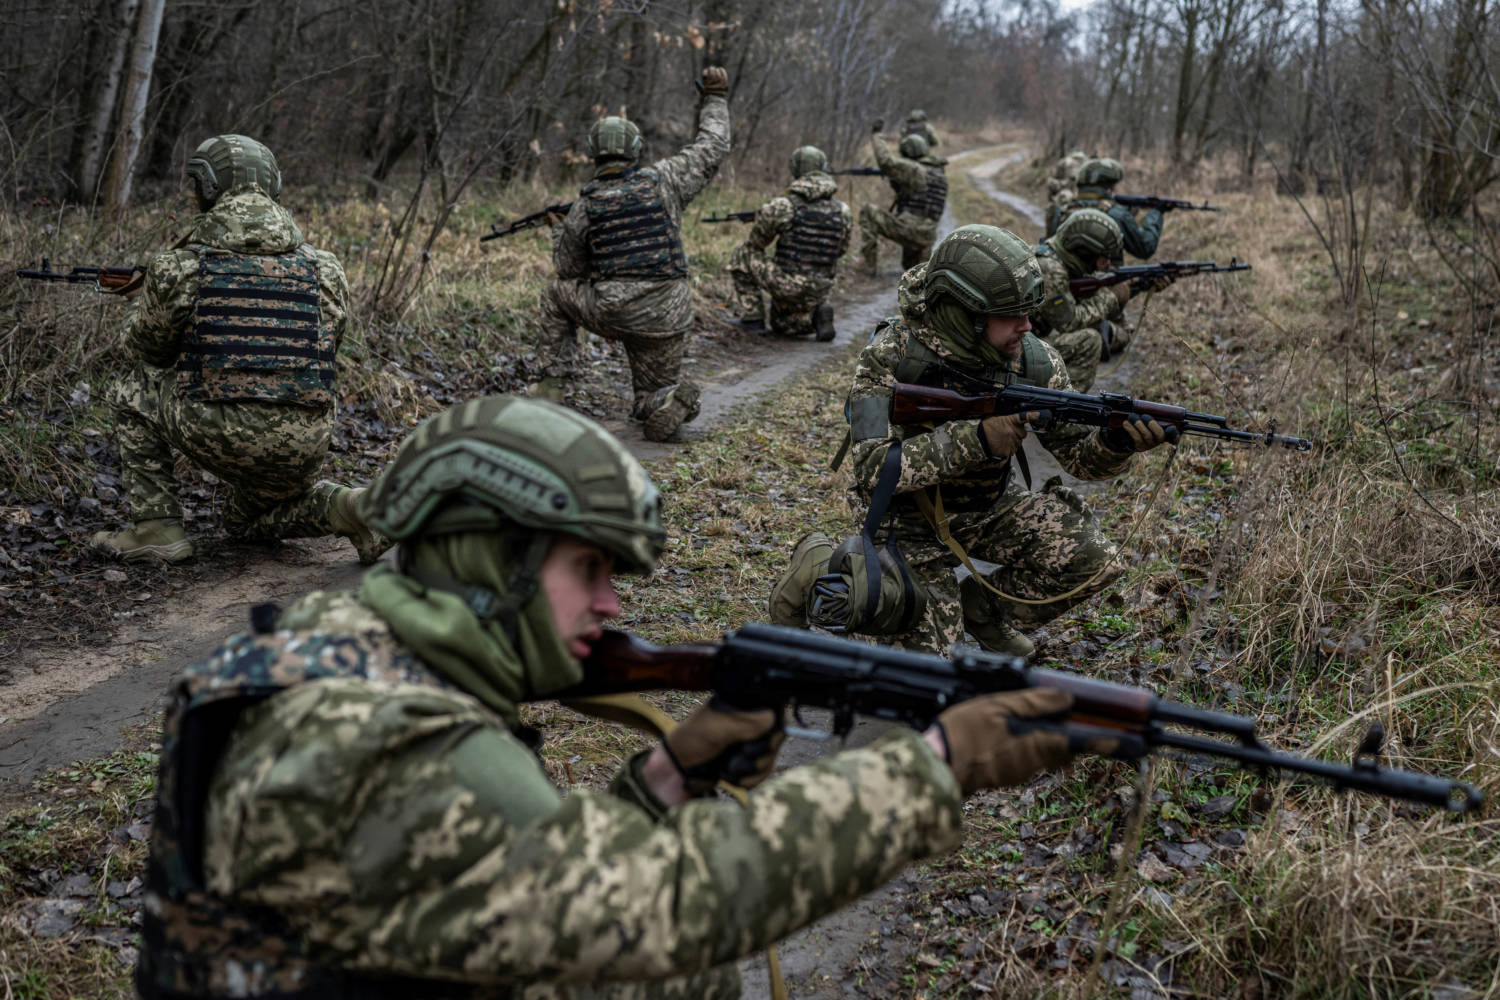 New Recruits Of The Da Vinci Wolves Battalion Attend Military Exercises In Central Ukraine